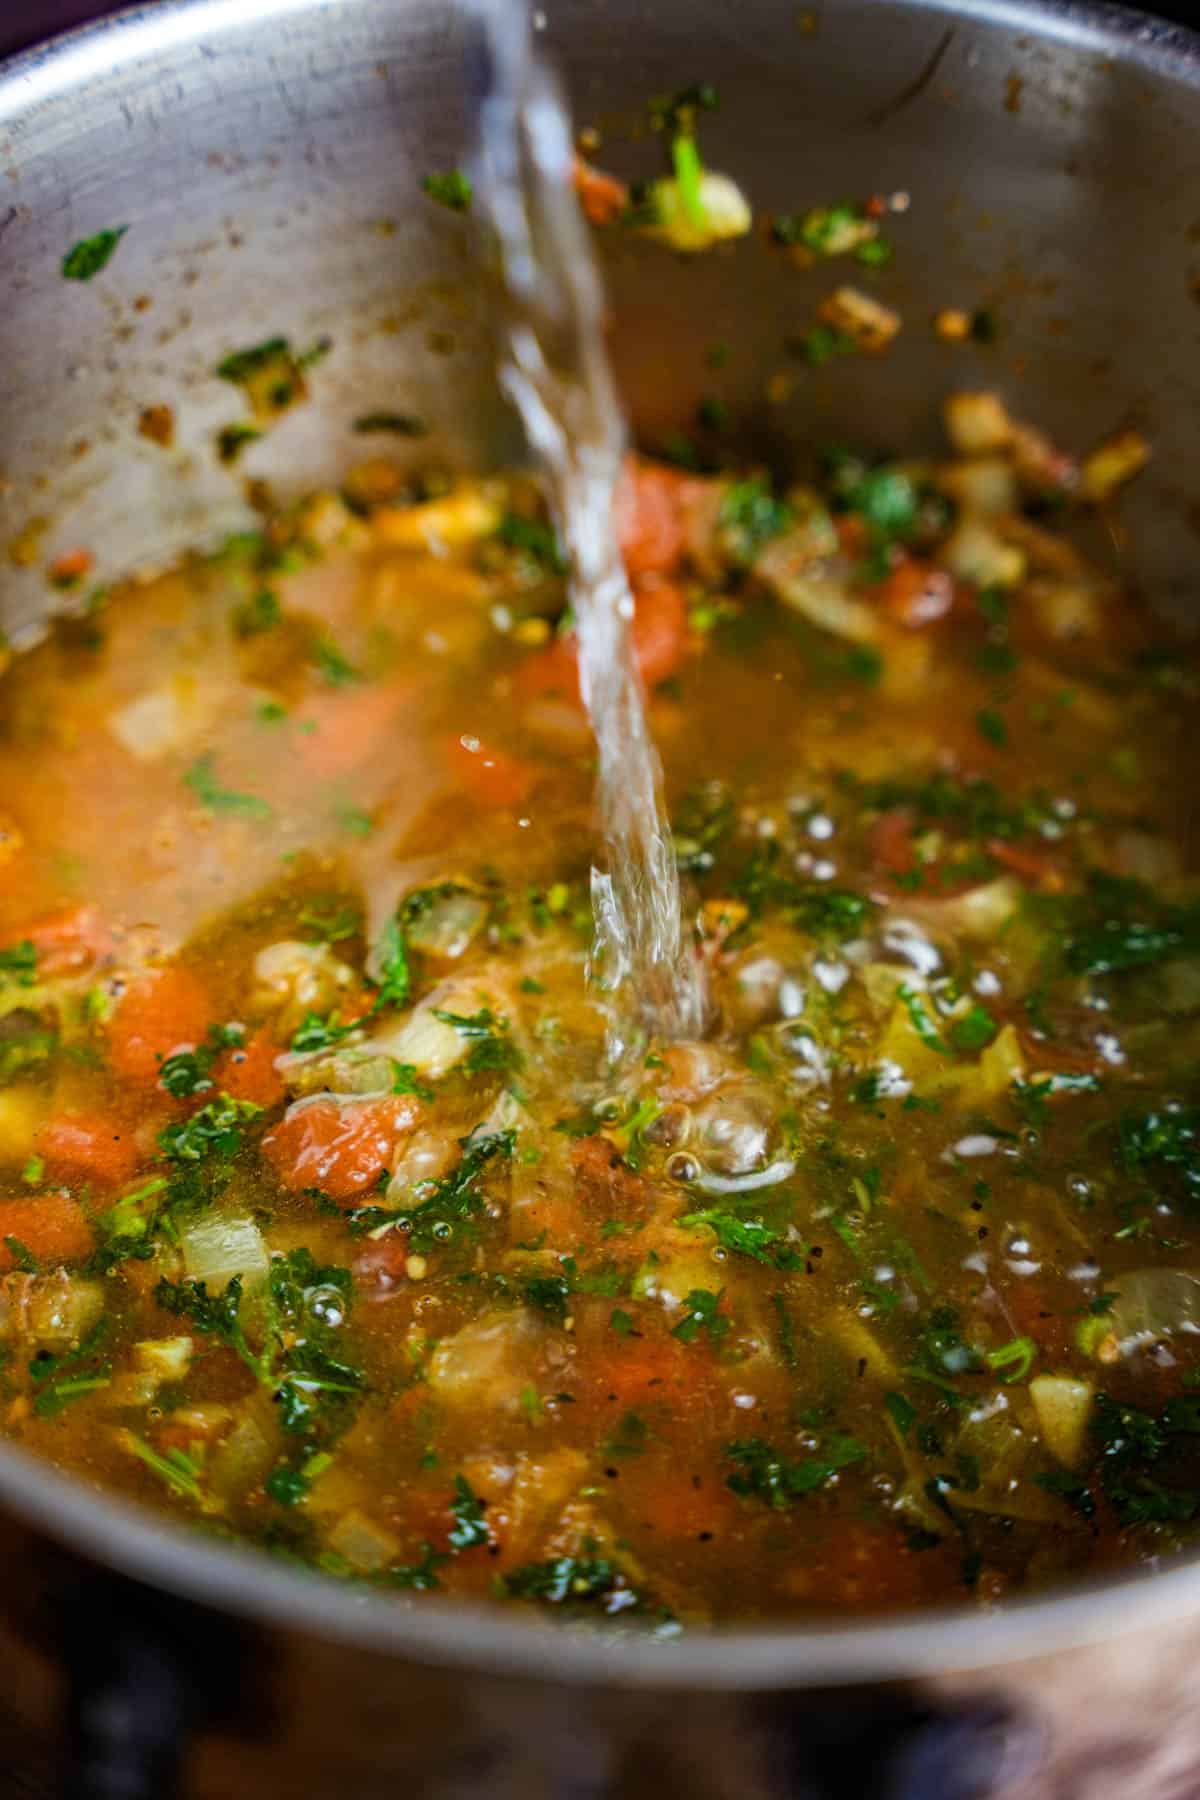 Water is added to the pot of cooking vegetables.